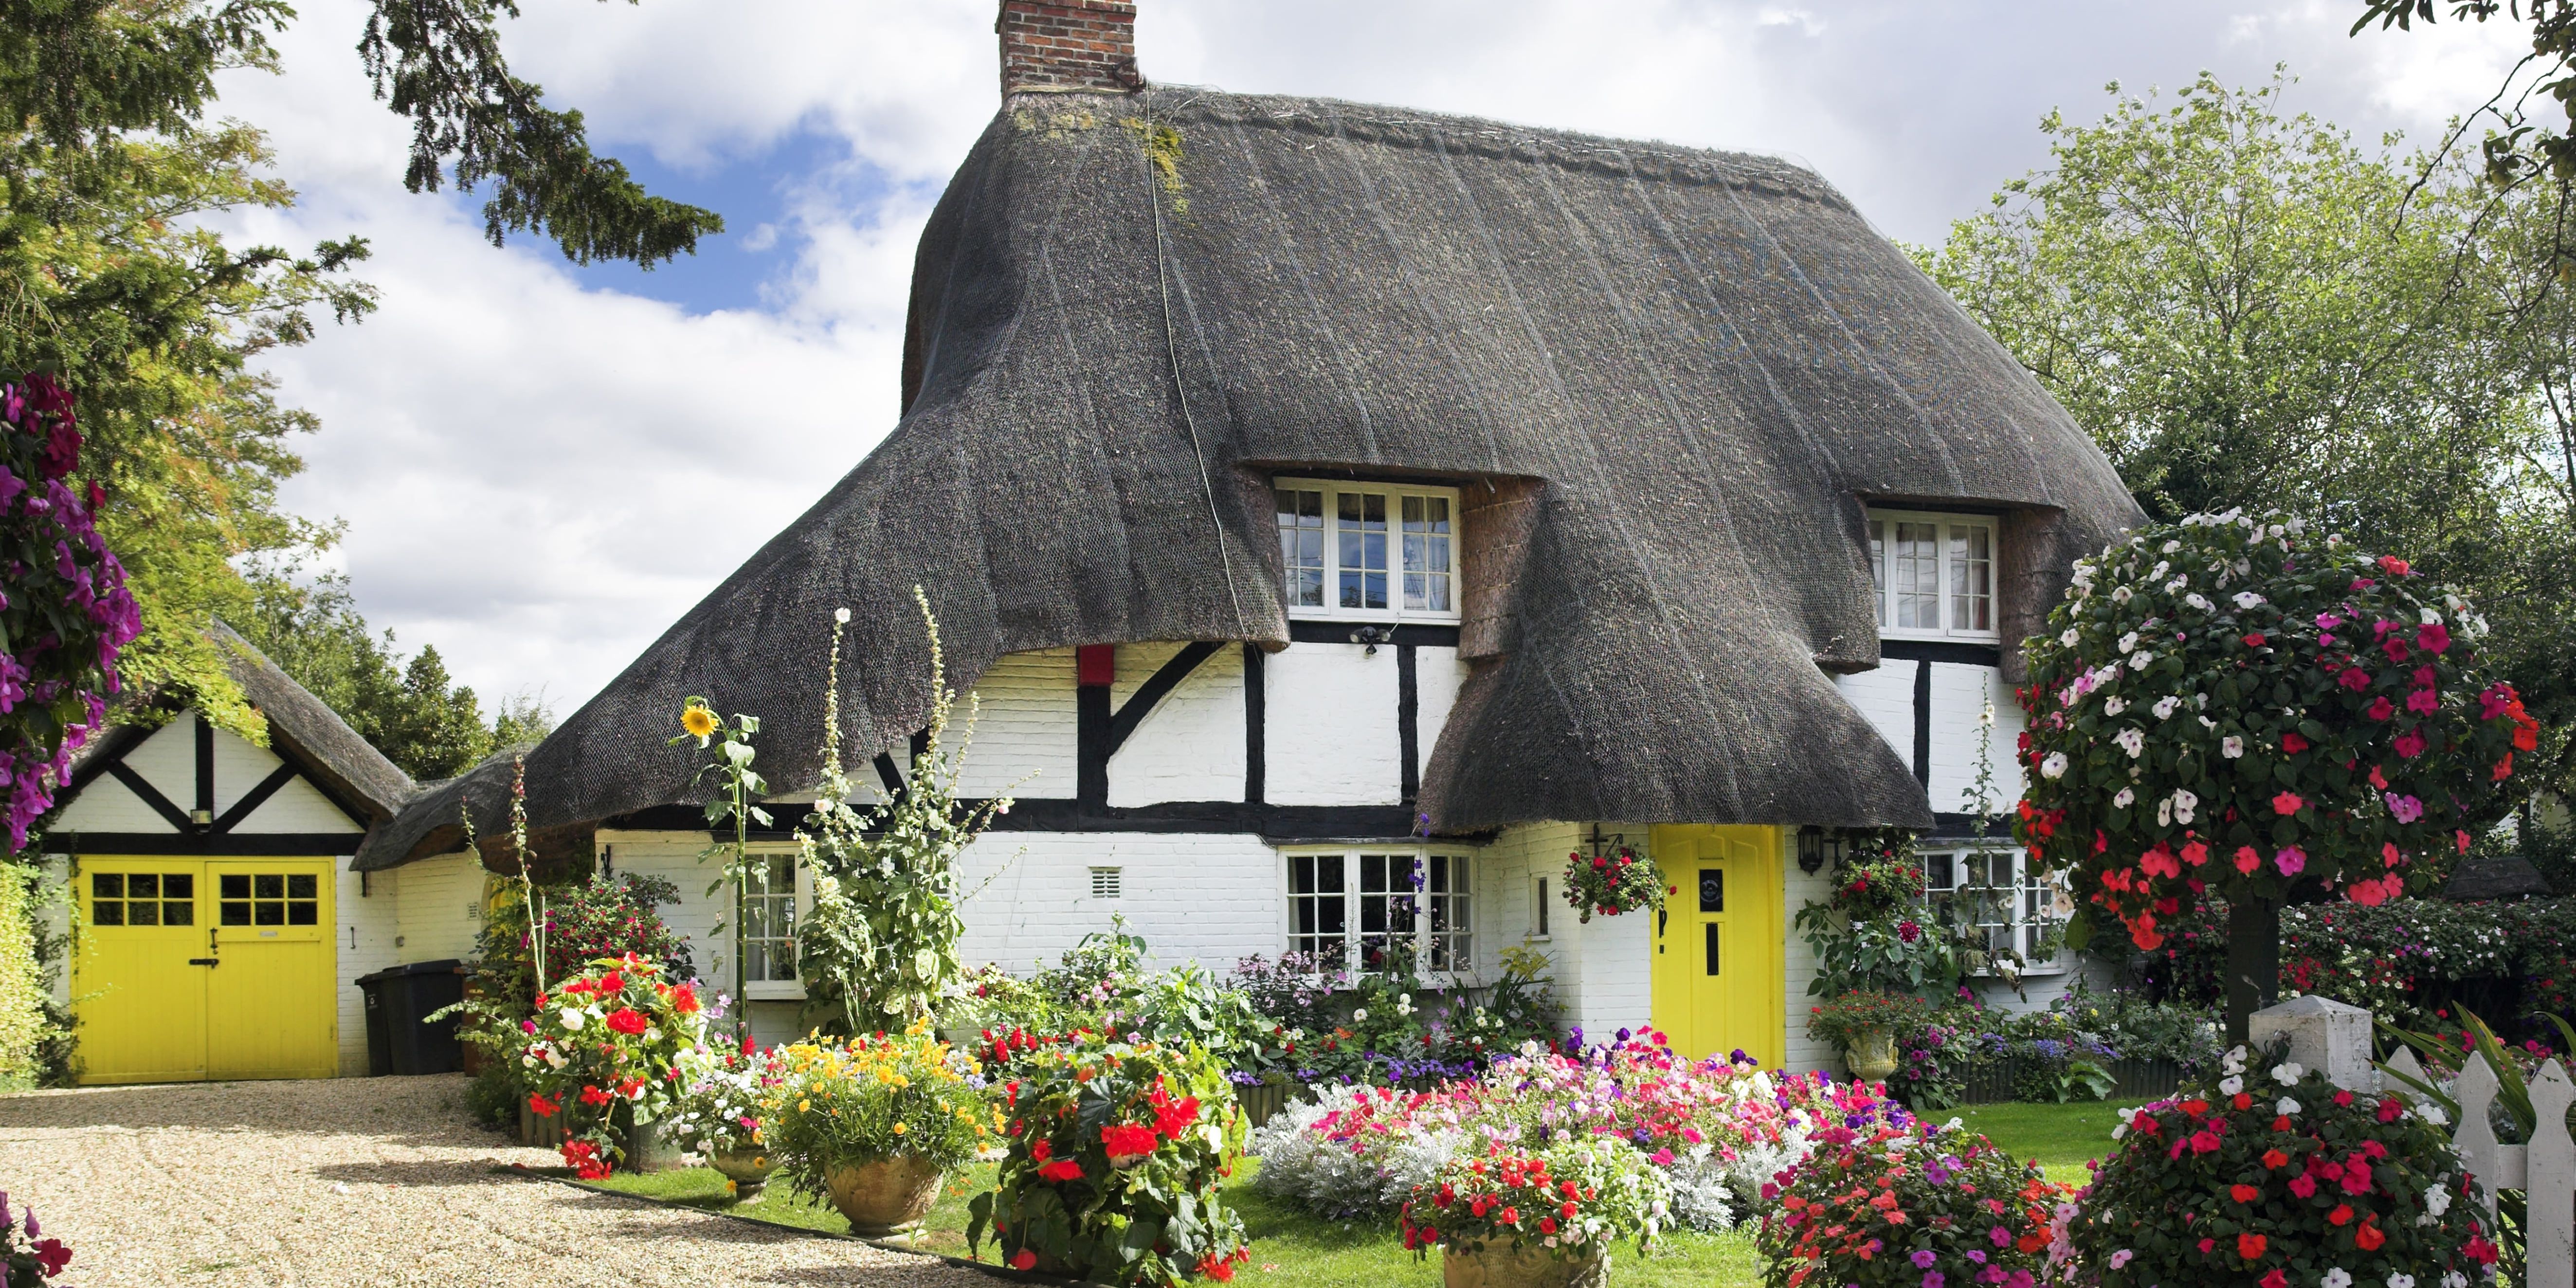 Photos Of English Country Cottages That Make Us Want One Right Now